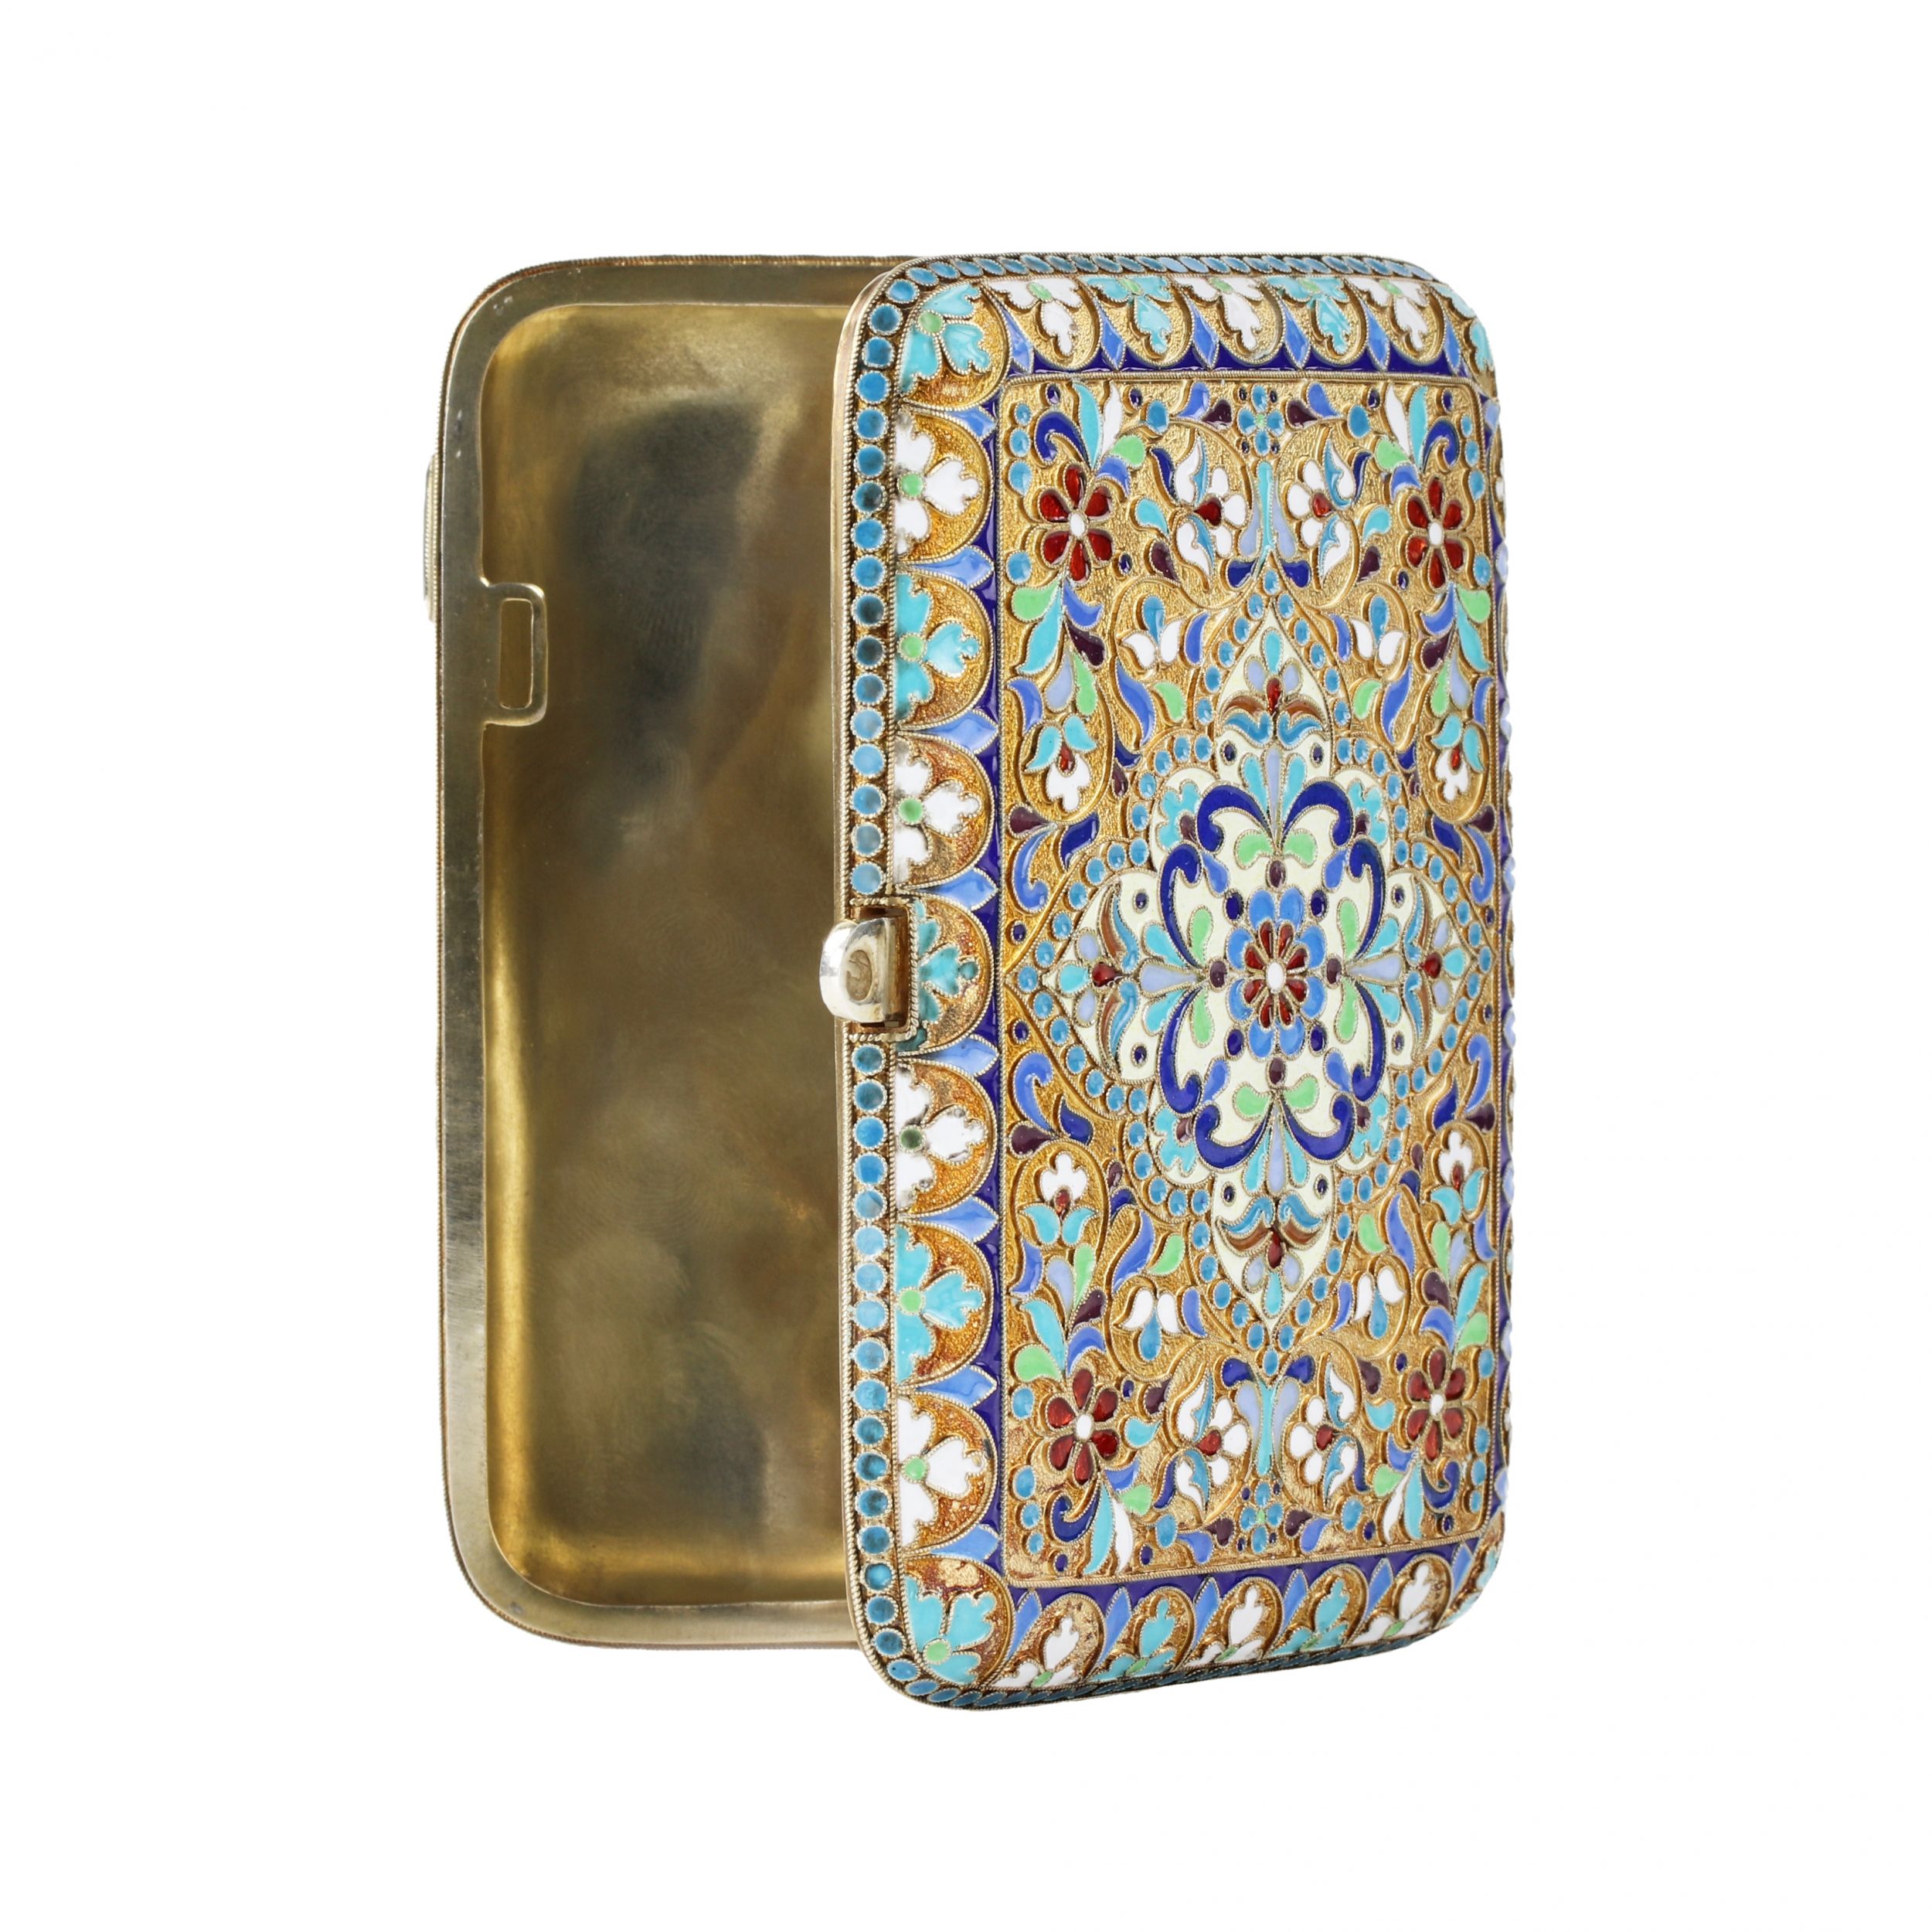 Silver cigarette case with gilding and cloisonne enamels. - Image 7 of 12